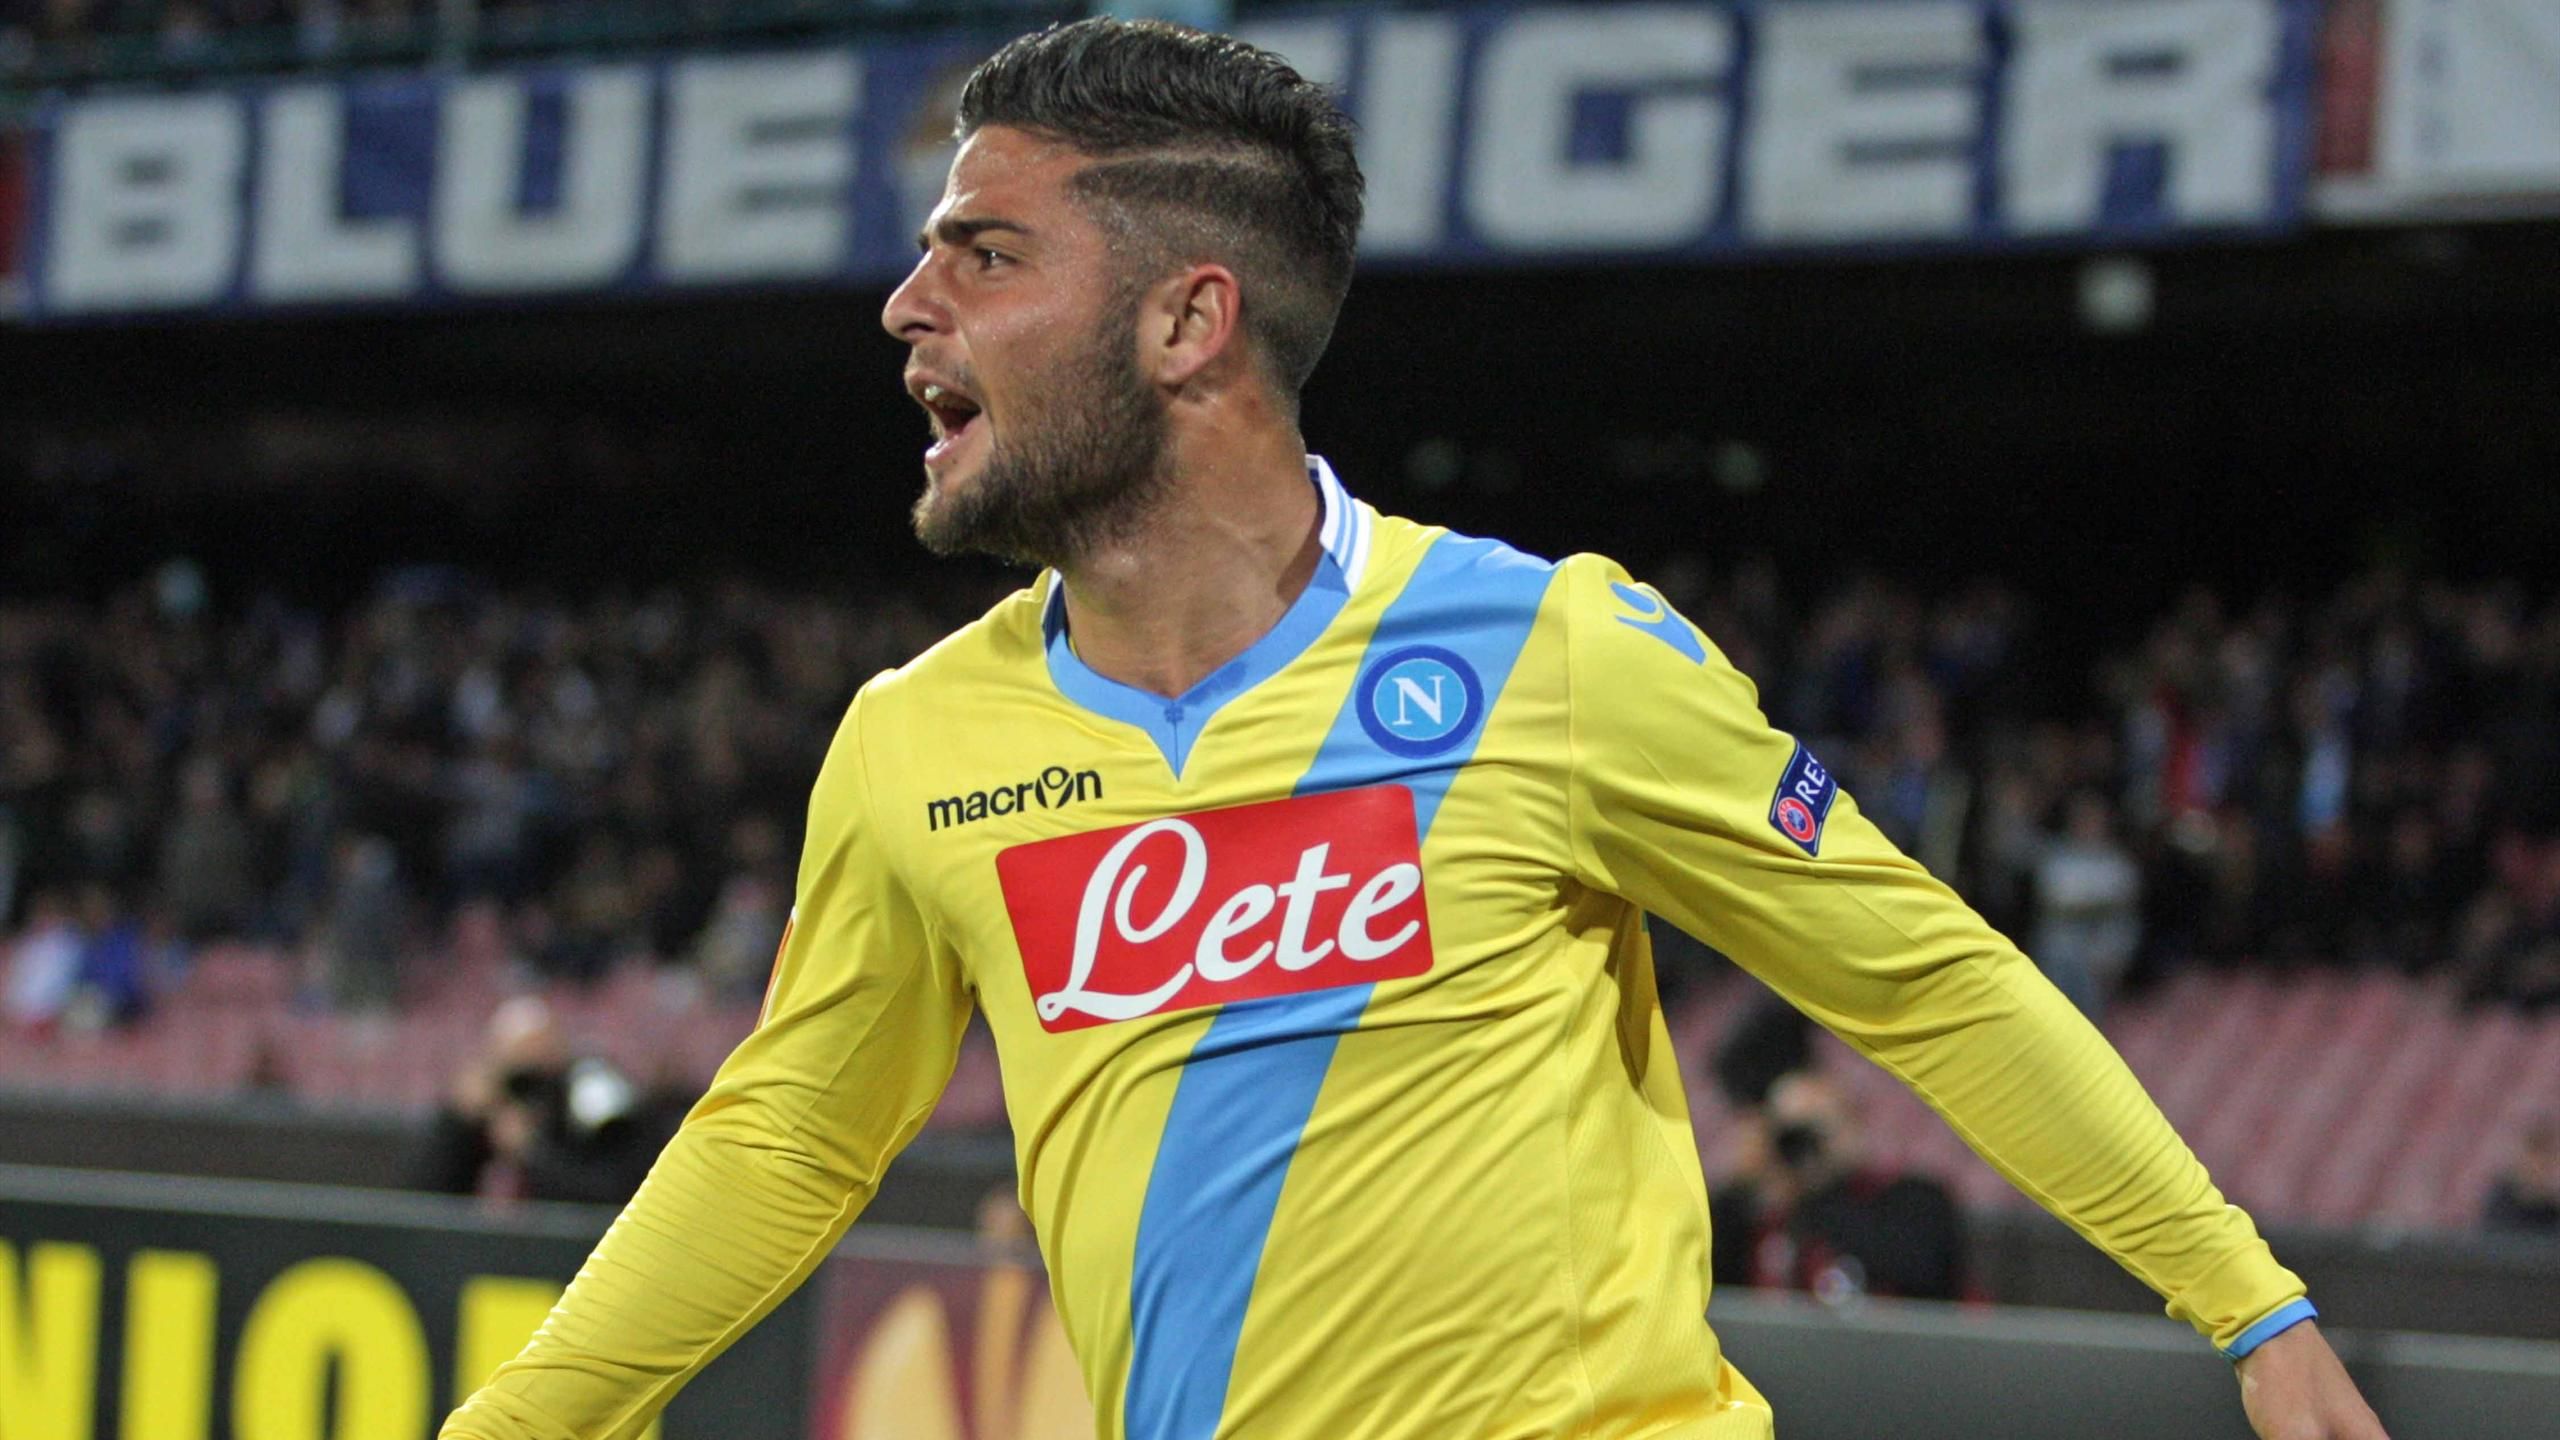 Napoli rescue draw with late rally against Genoa